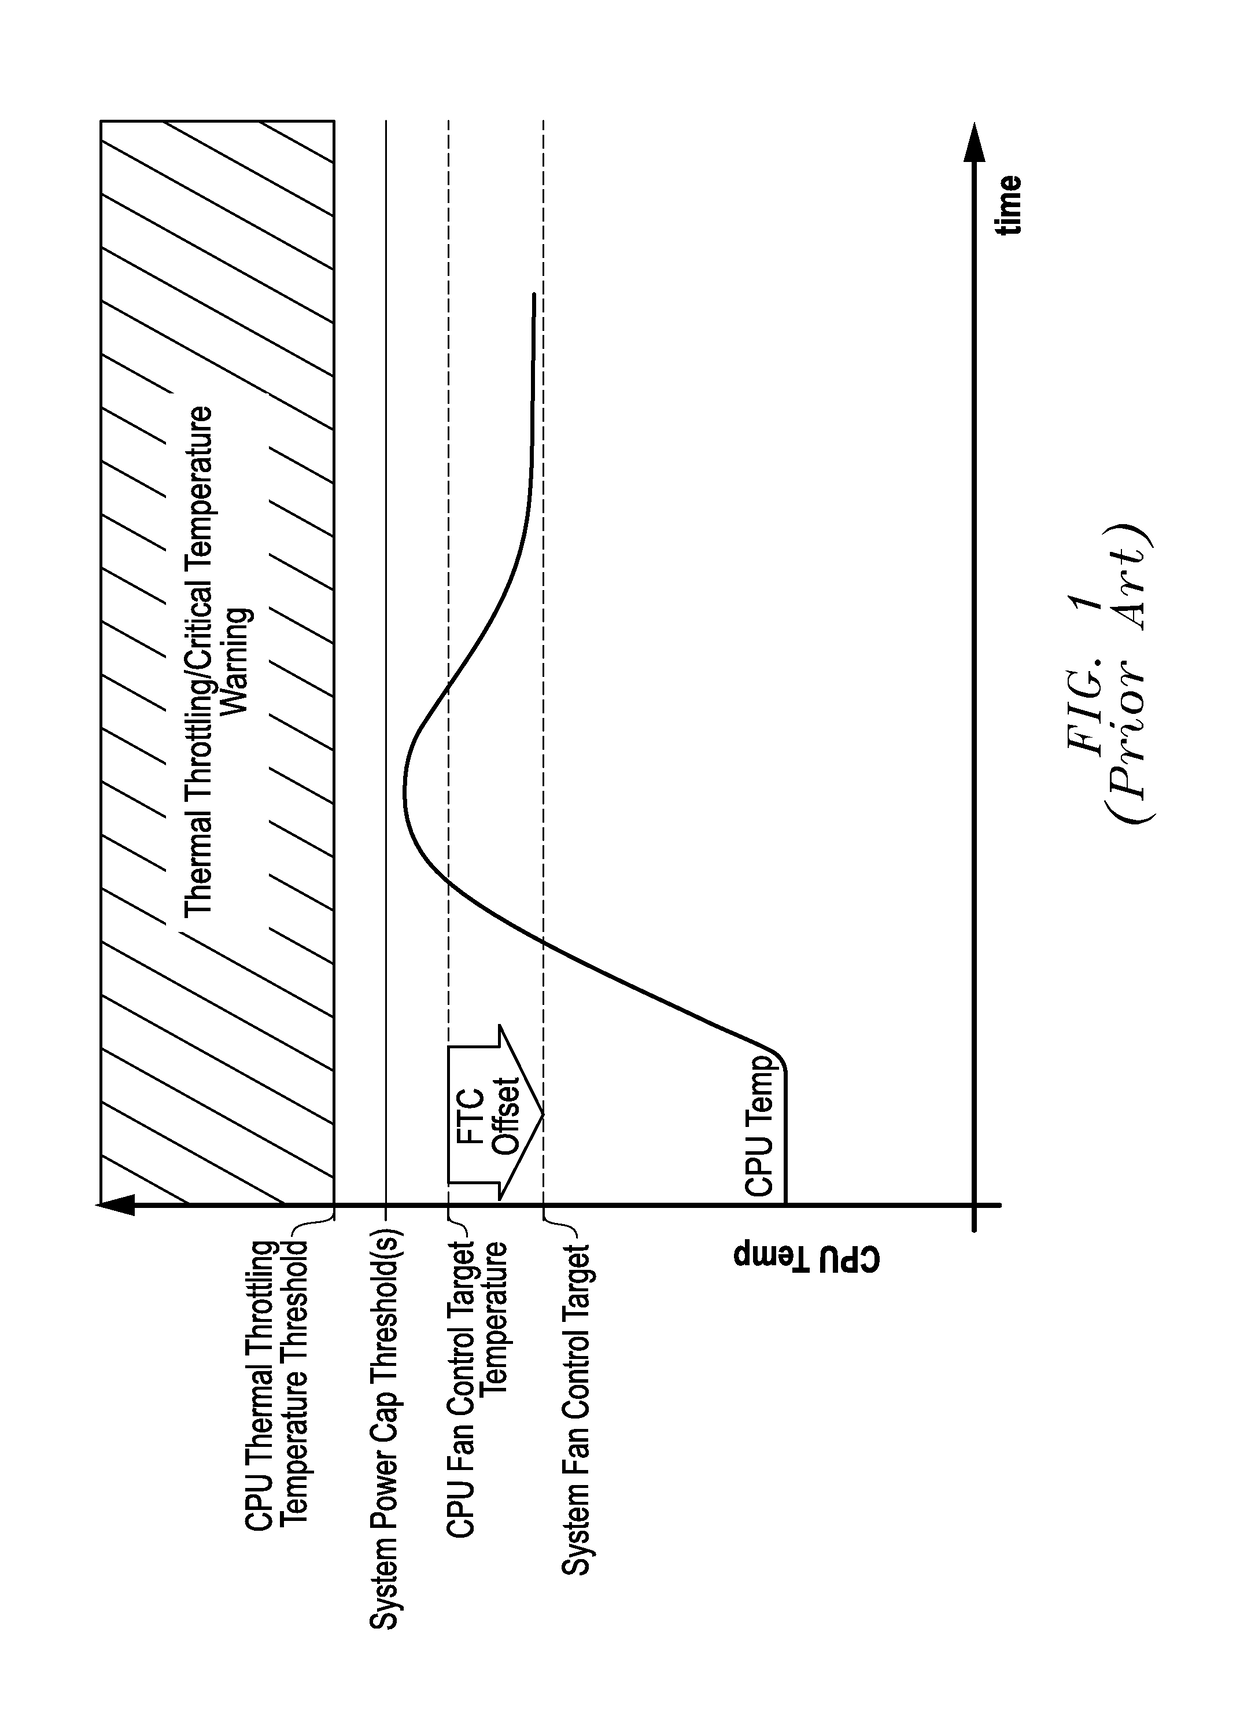 Systems and methods of adaptive thermal control for information handling systems